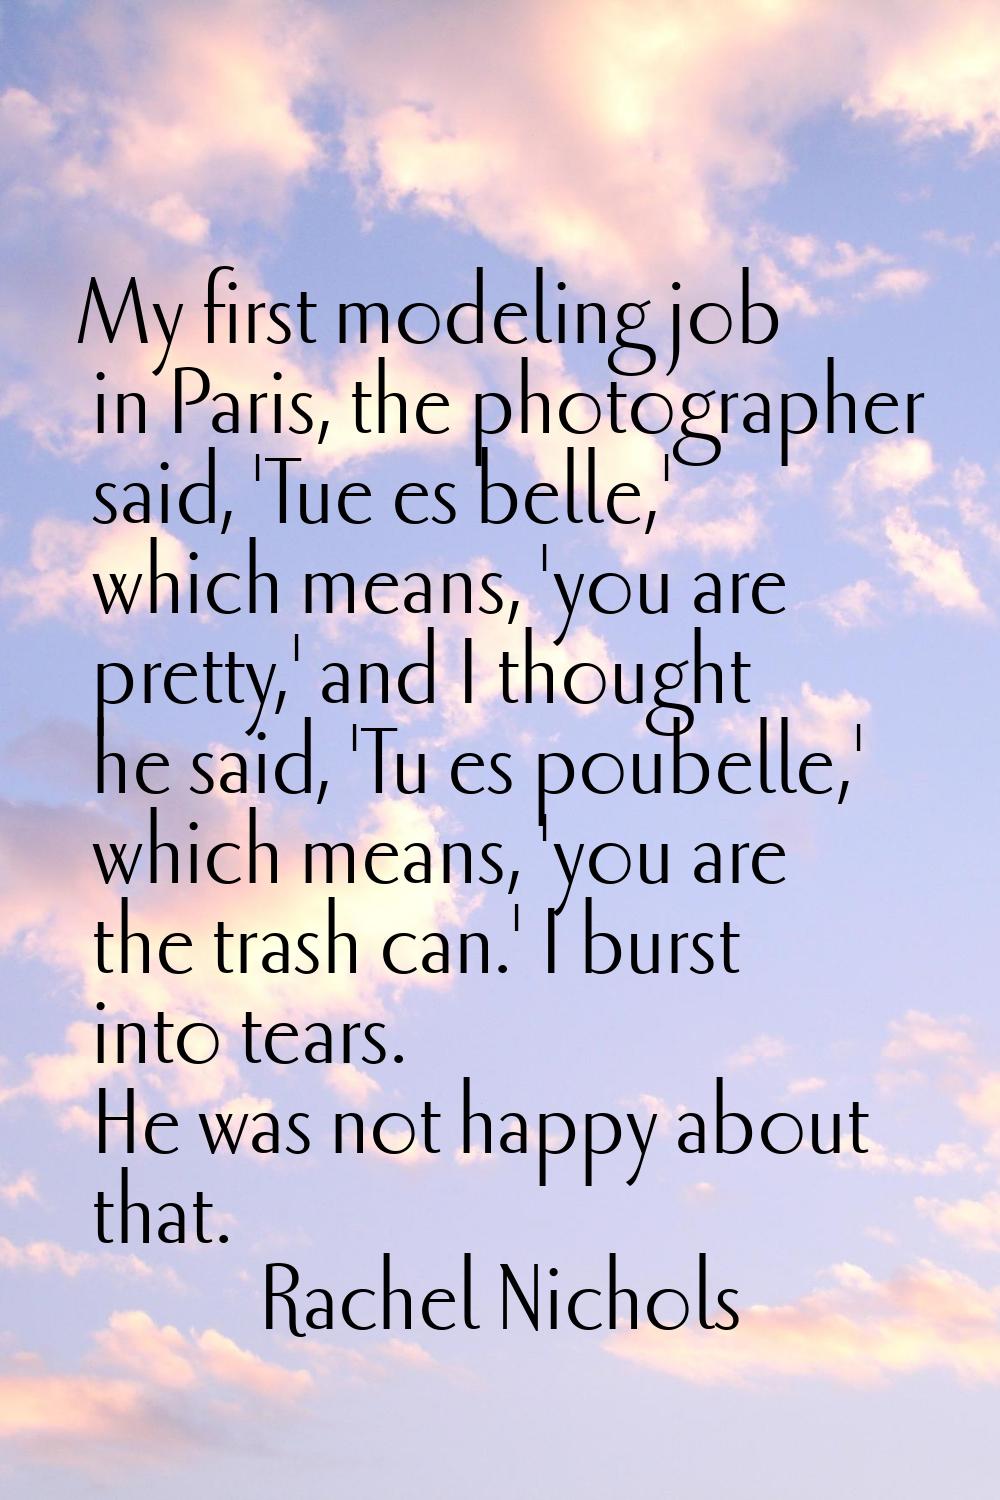 My first modeling job in Paris, the photographer said, 'Tue es belle,' which means, 'you are pretty